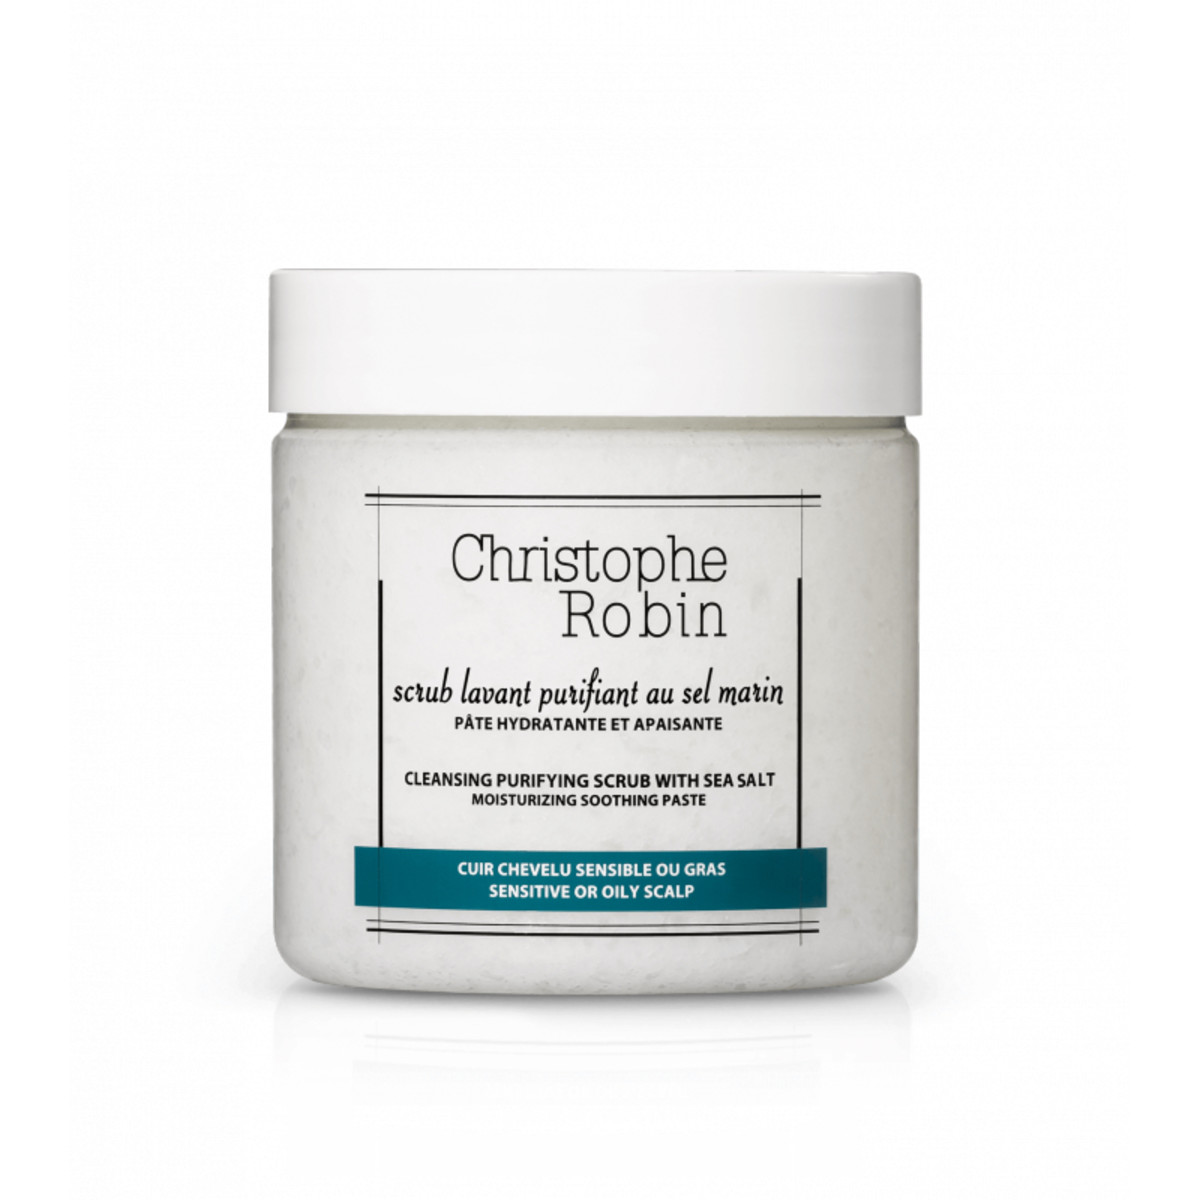 Christophe Robin Cleansing Purifying Scrub With Sea Salt, $52, available at Sephora.